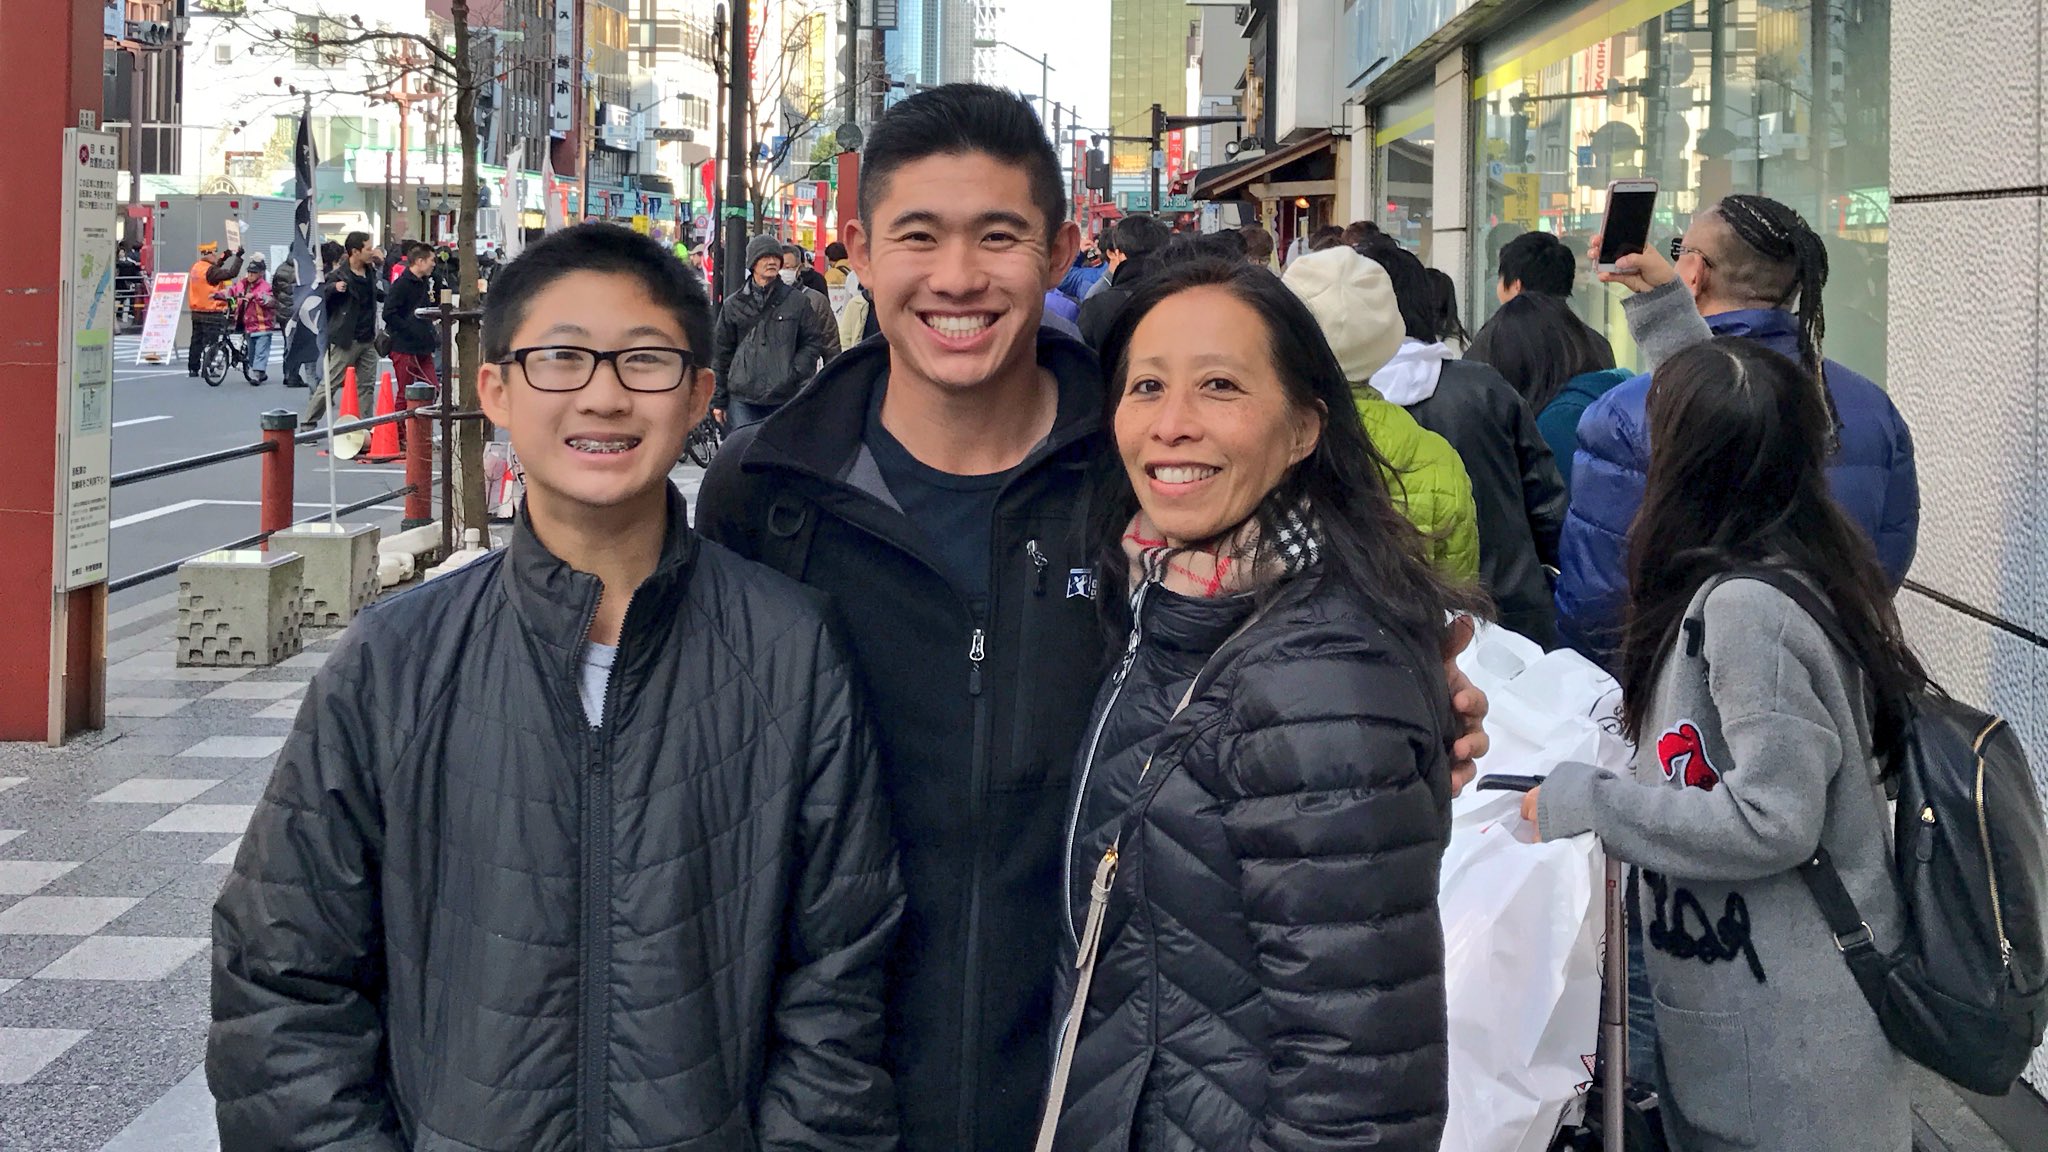 Debbie Morikawa wearing a black jacket and checkered scarf with her sons, Collin and Garrett smiling